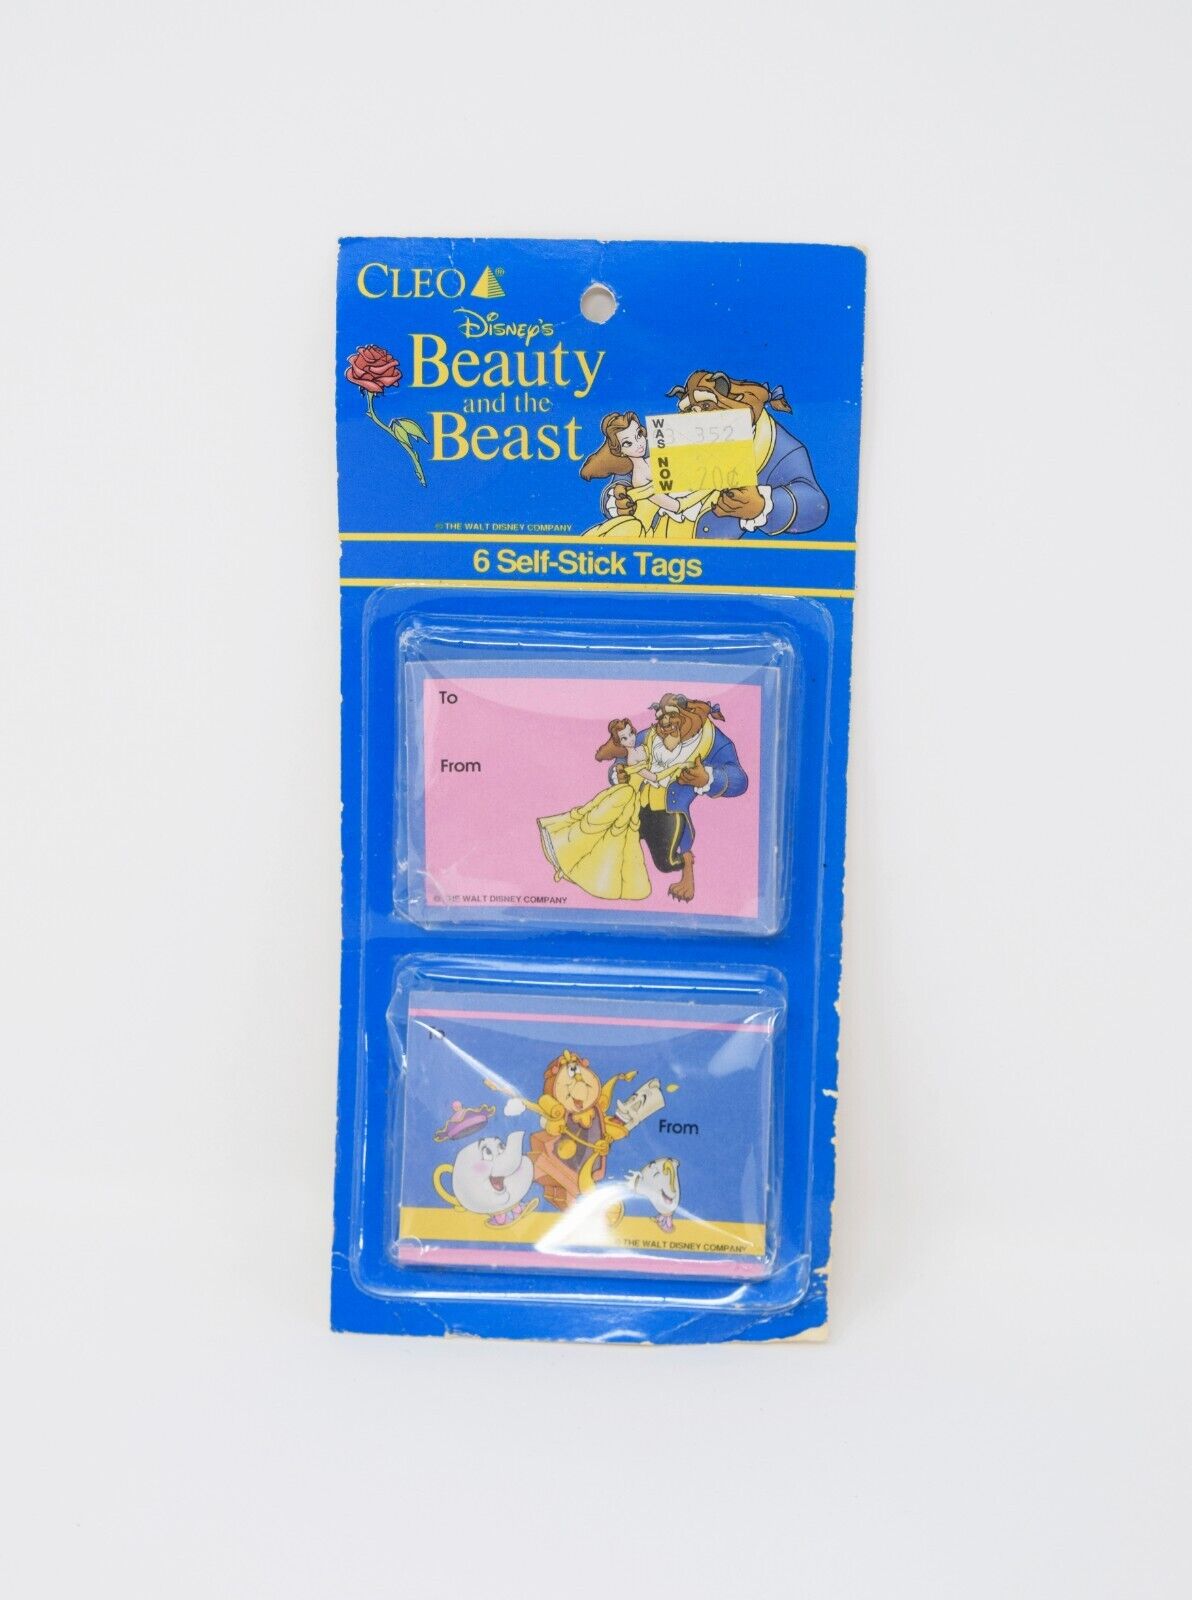 Vintage 1991 Cleo Beauty and the Beast Self-Stick To From Gift Tags SEALED